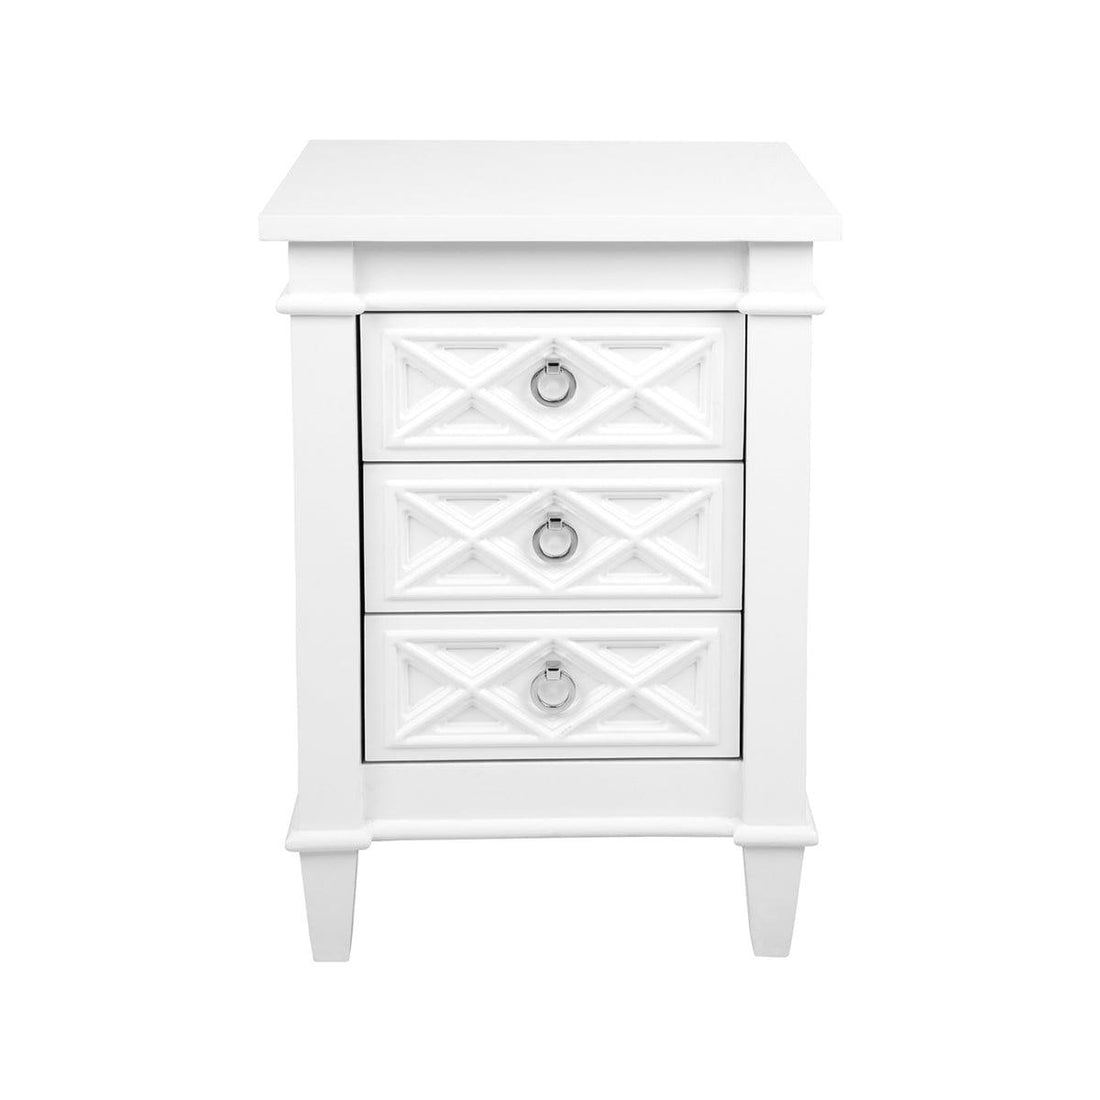 House Journey Plantation Bedside Table -  Small White